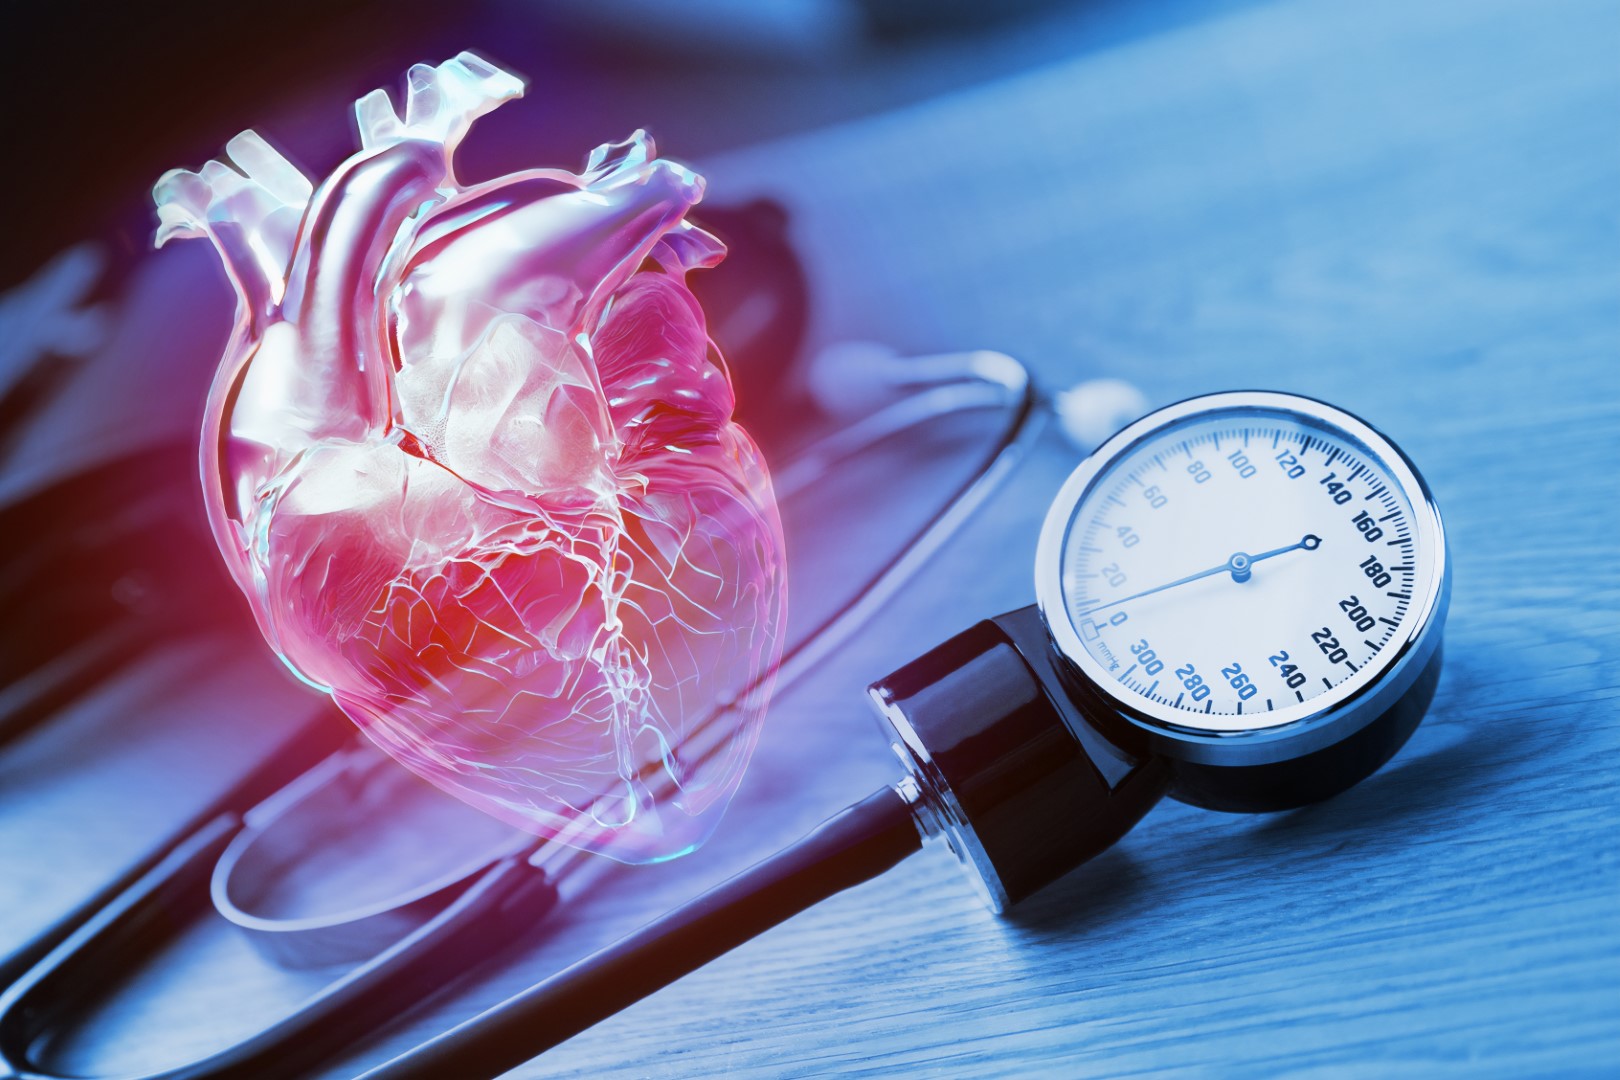 Illustration of a heart next to a blood pressure gauge represents the risk of a young athlete’s heart attack. 